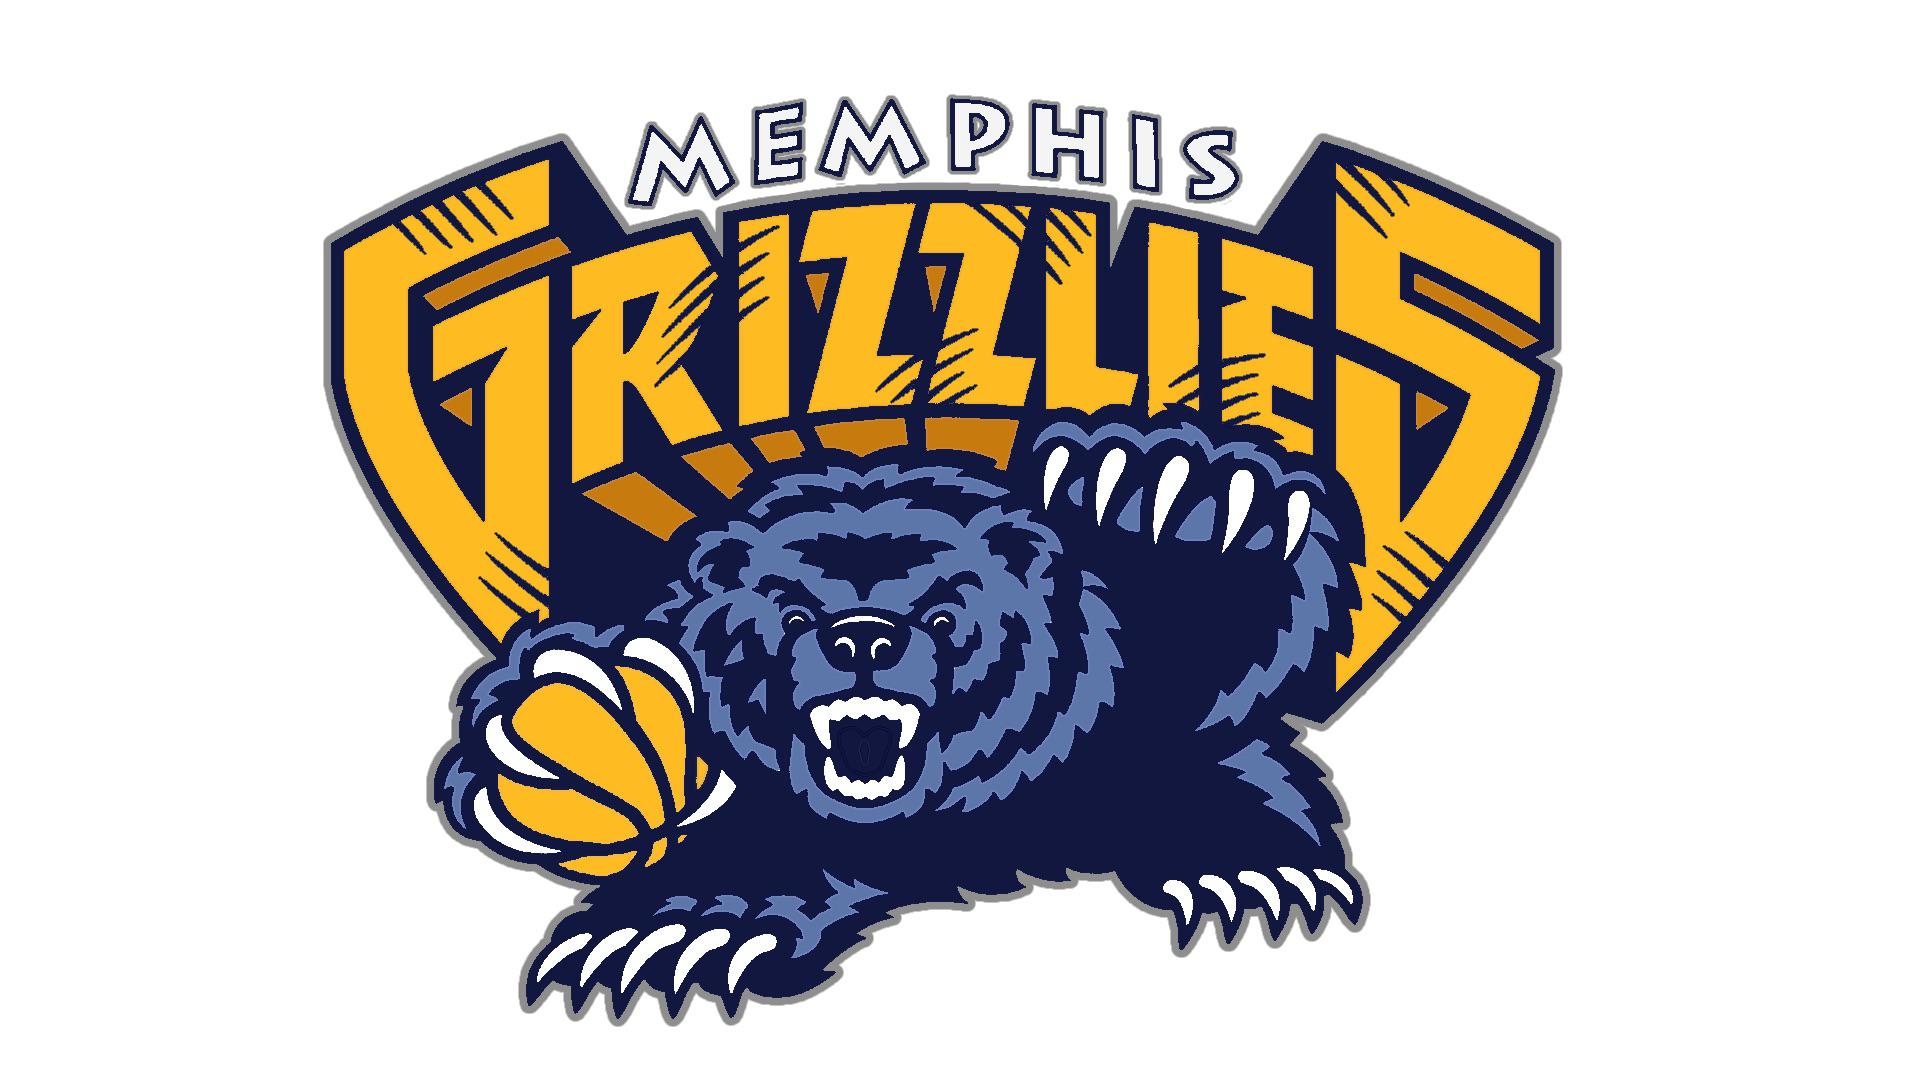 I recolored the old grizzlies logo with the current colors!